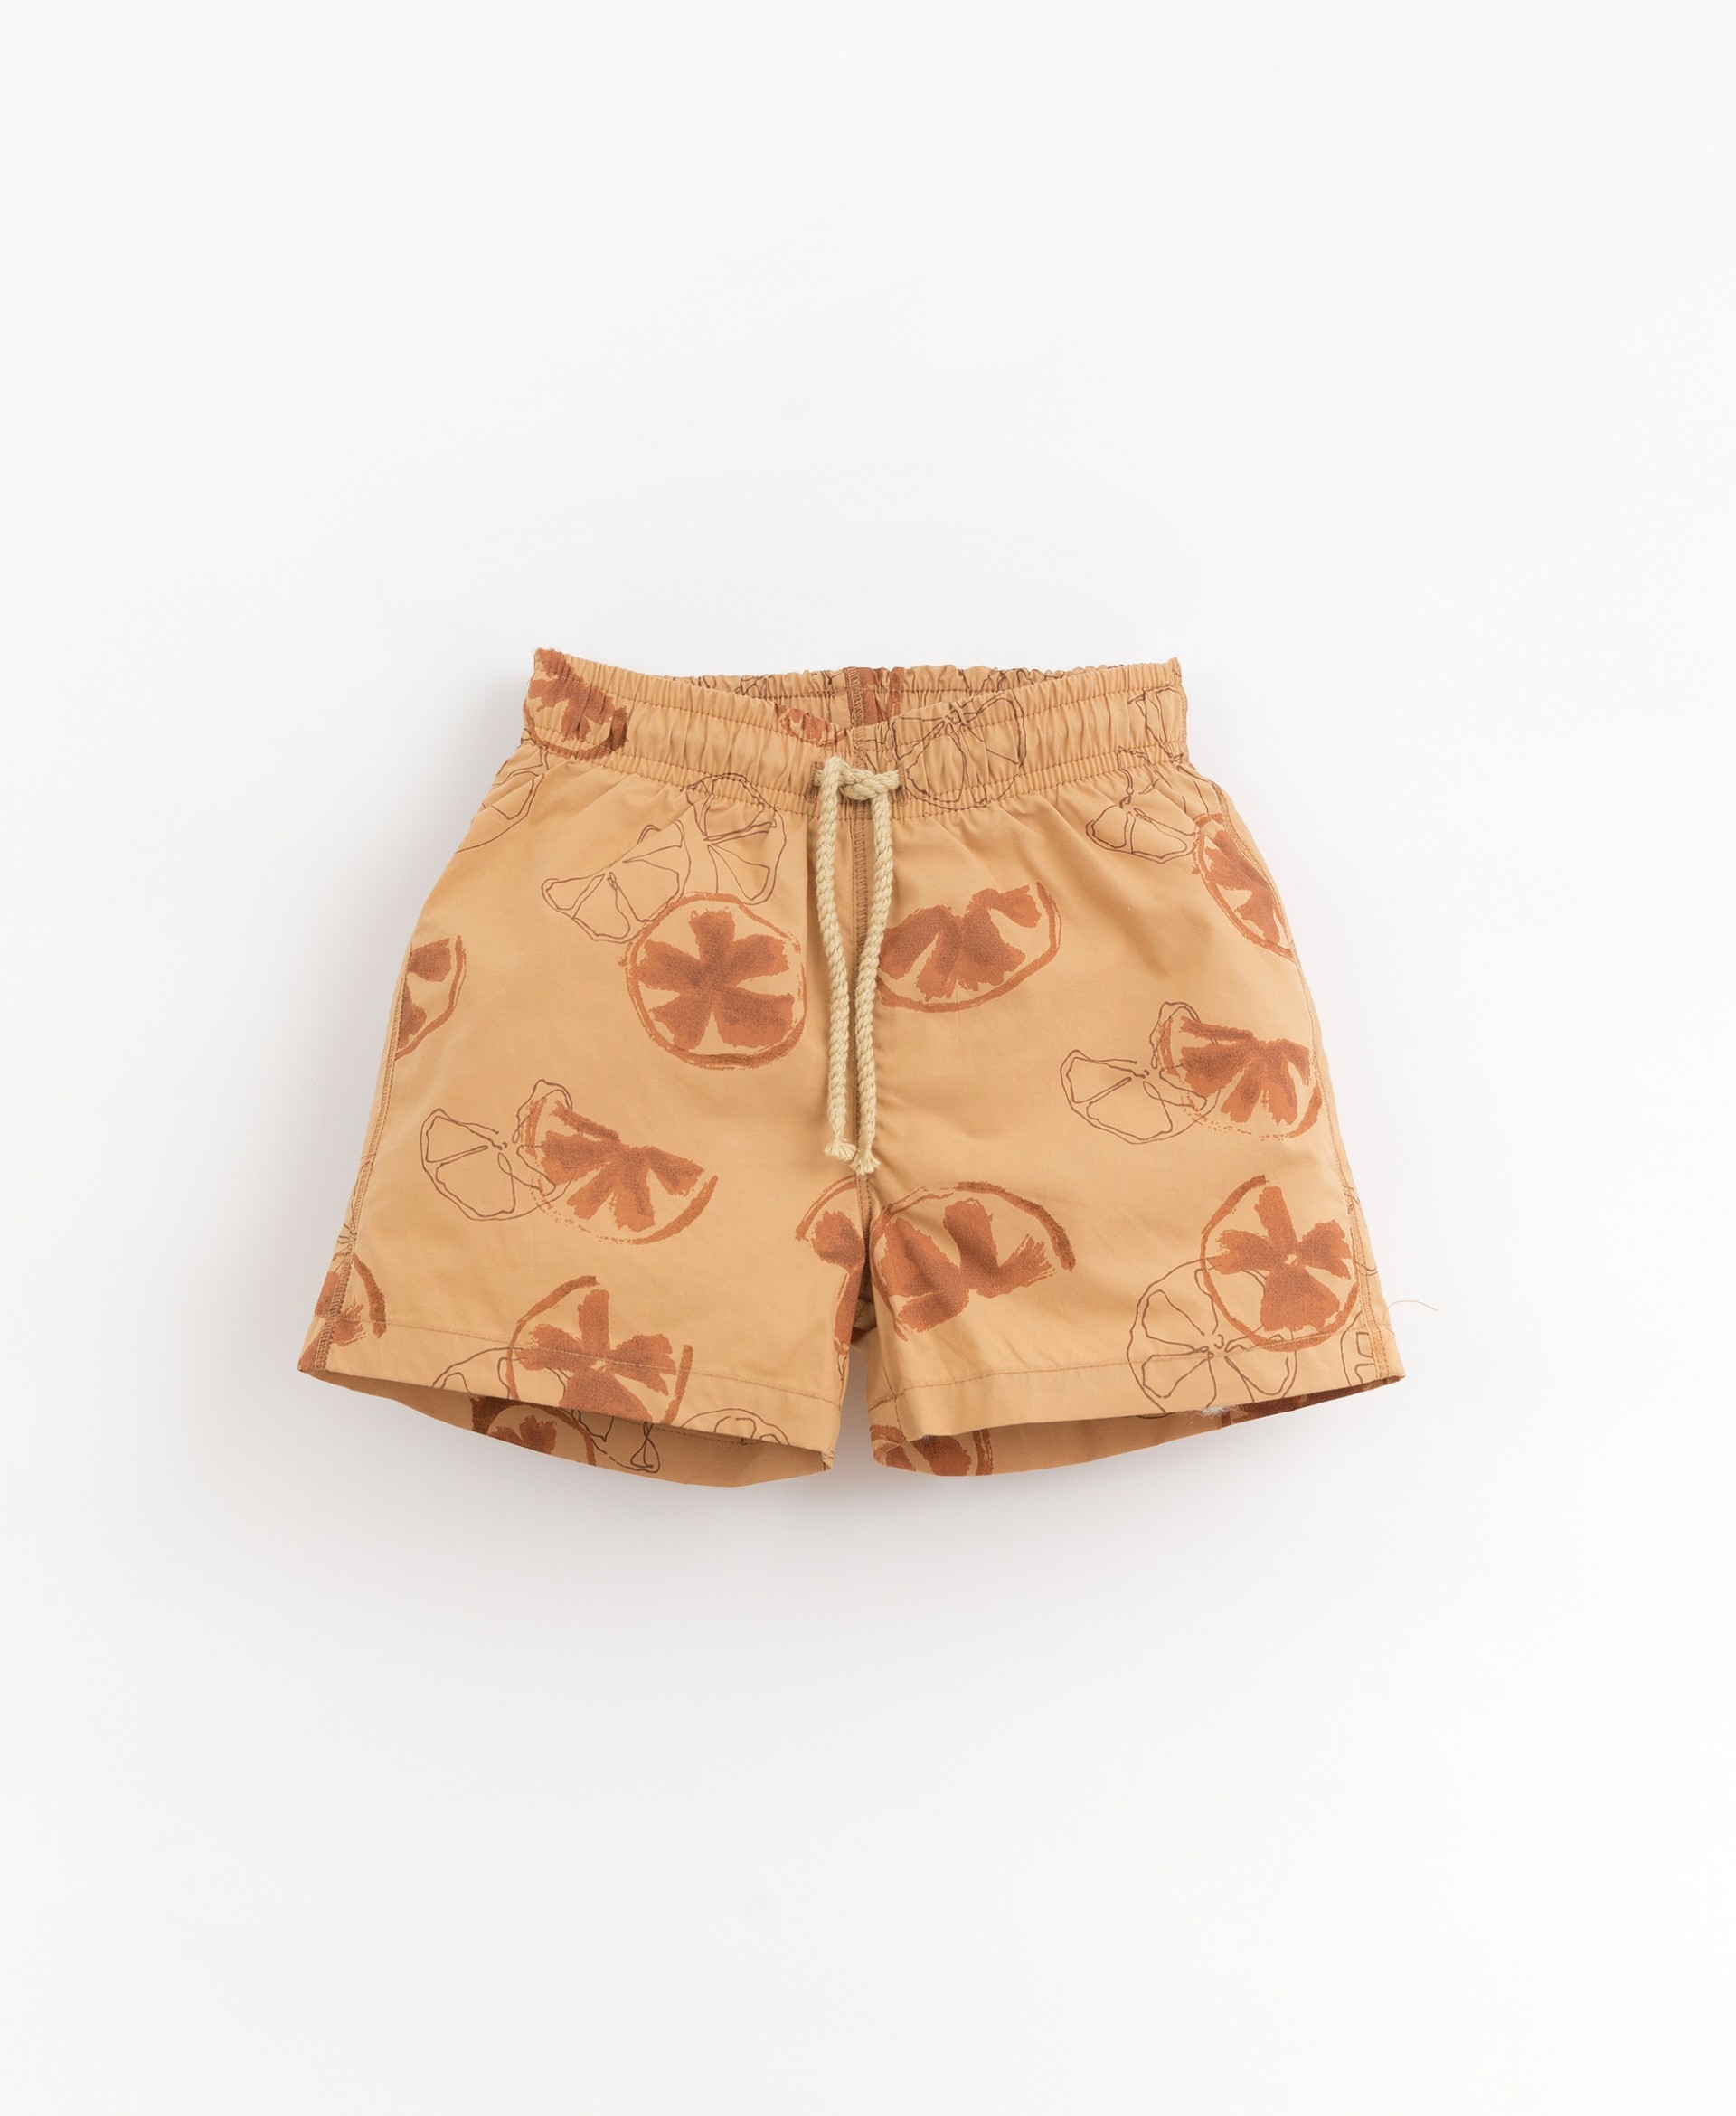 Swimming shorts with citrus print | Organic Care